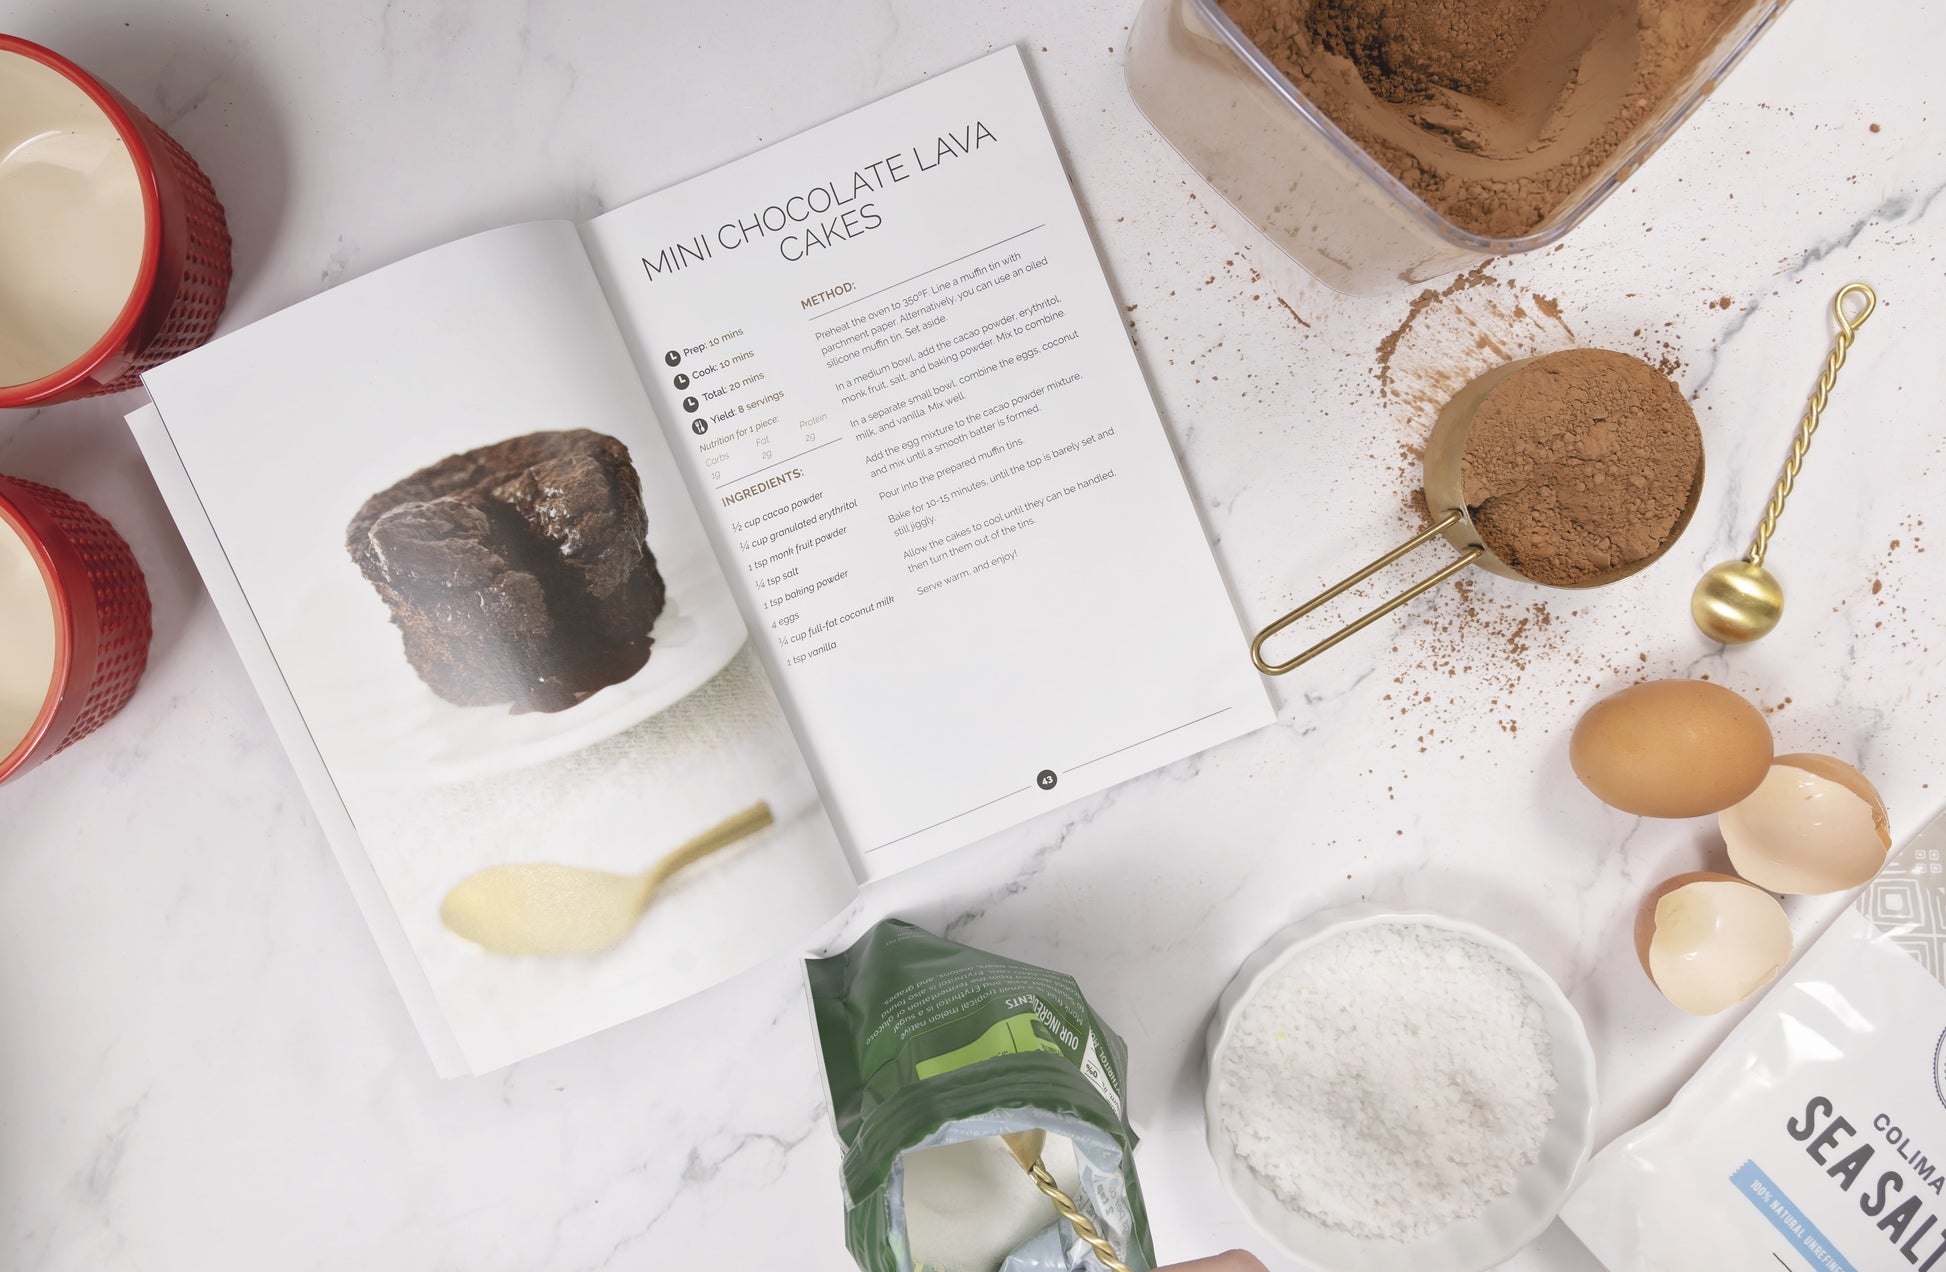 An opened Keto Sweets Cookbook laid on a plain marble surface surrounded by sea salt, chocolate, and egg.